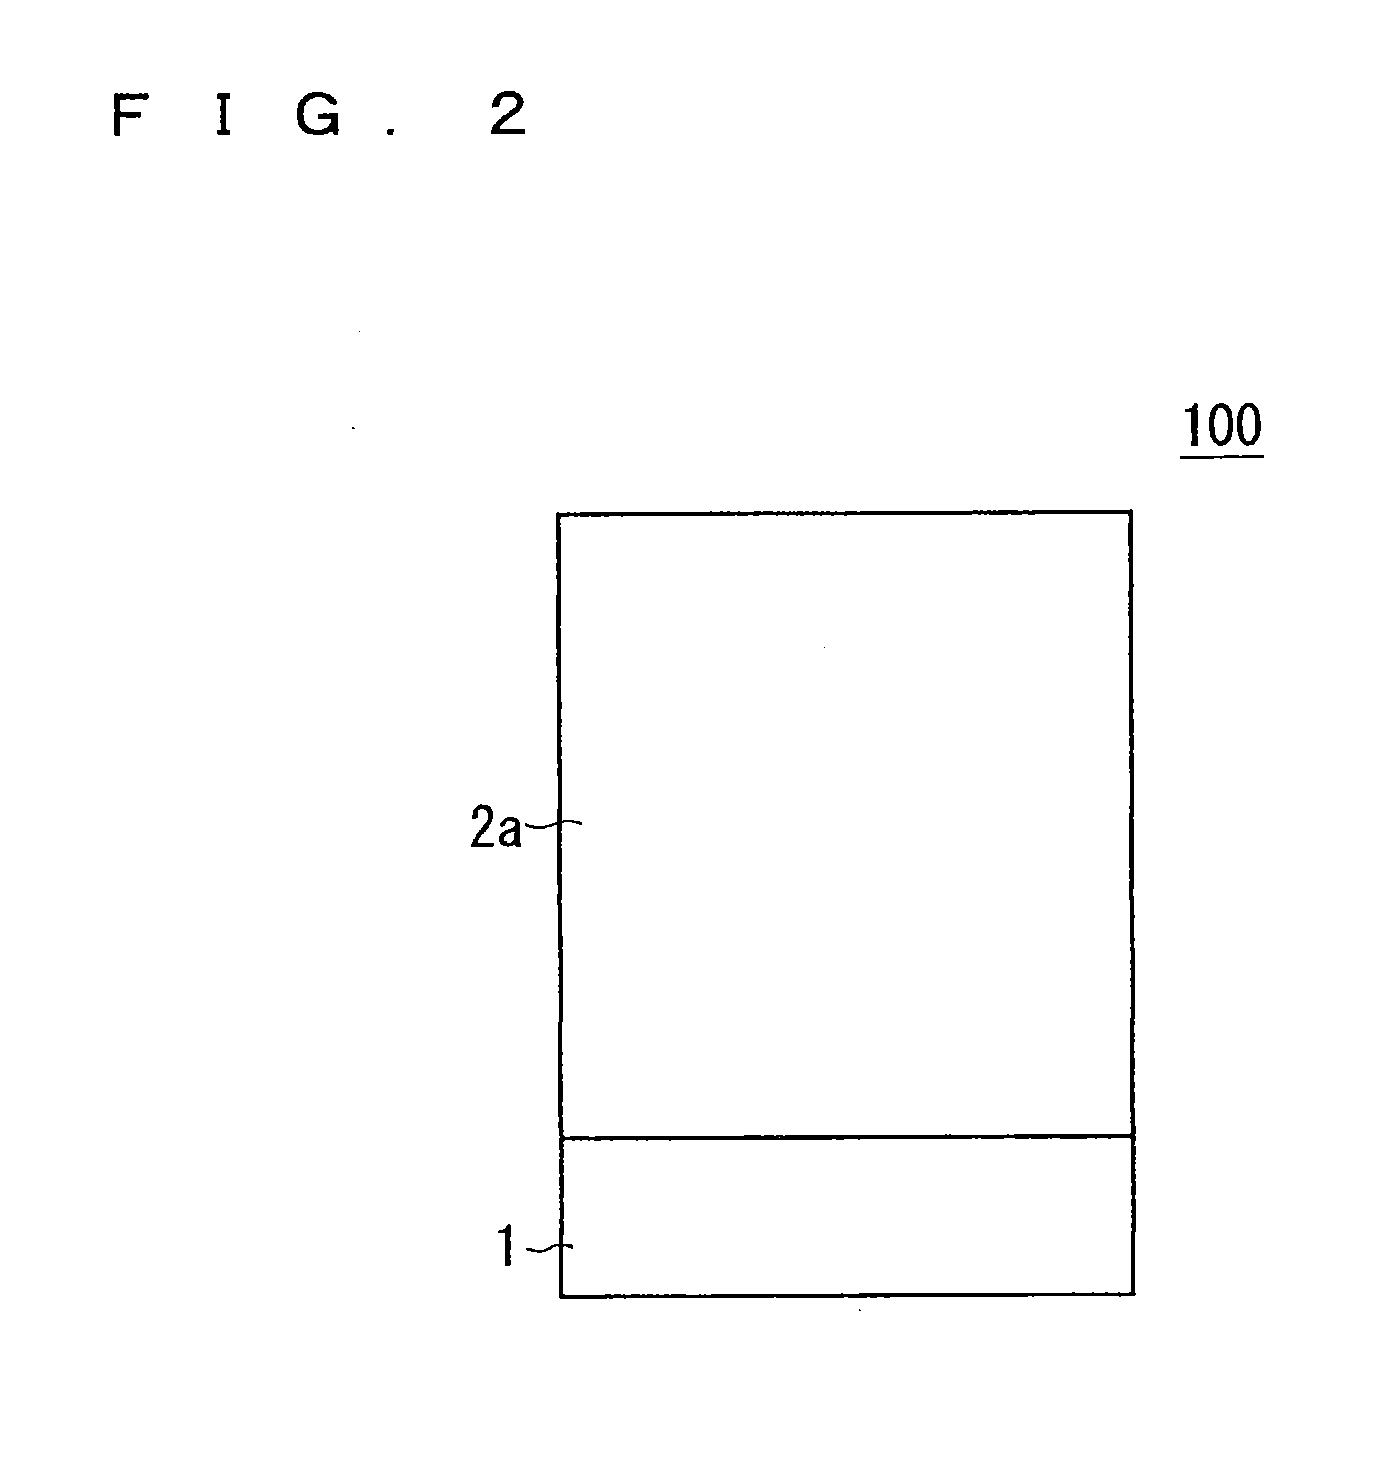 Epitaxial wafer and semiconductor device